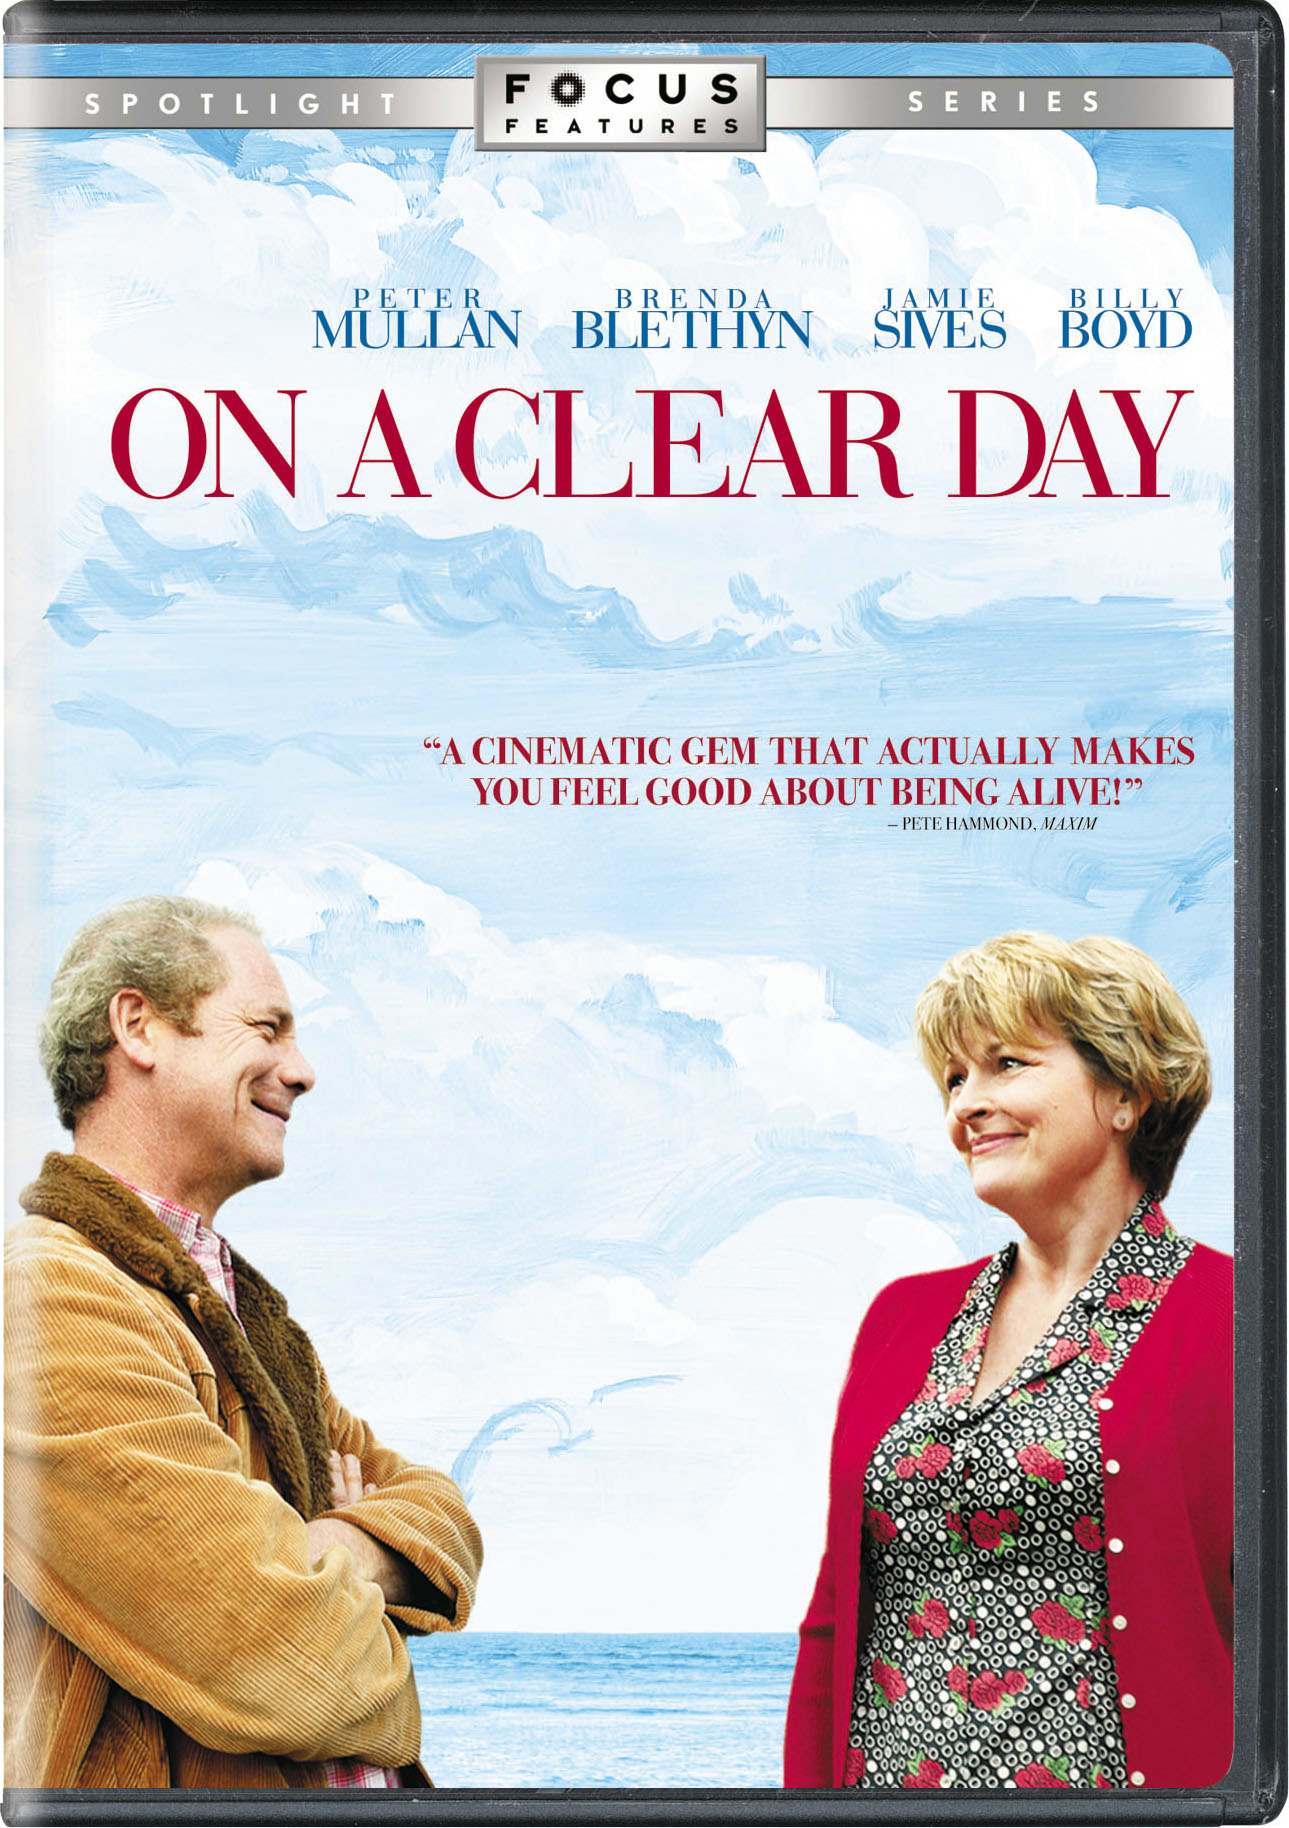 On A Clear Day - DVD [ 2006 ]  - Drama Movies On DVD - Movies On GRUV